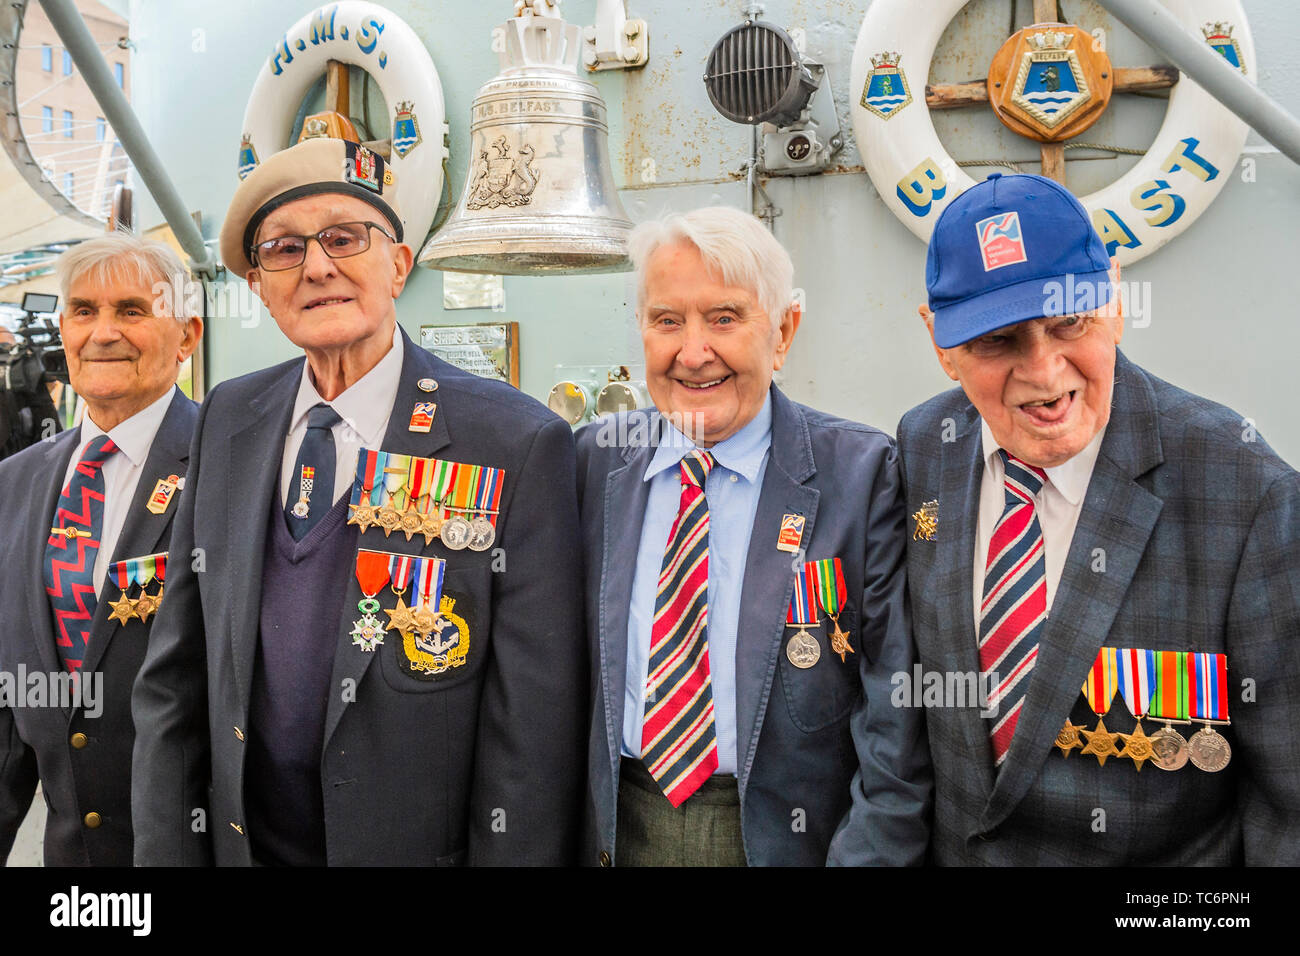 London, UK. 06th June, 2019. Arthur Barnes, John Connelly, Nev Lees and Bob Jones - D-Day Veterans from the Blind Veterans Association - Imperial War Museums marks the 75th anniversary of the D-Day landings on board HMS Belfast. Credit: Guy Bell/Alamy Live News Stock Photo